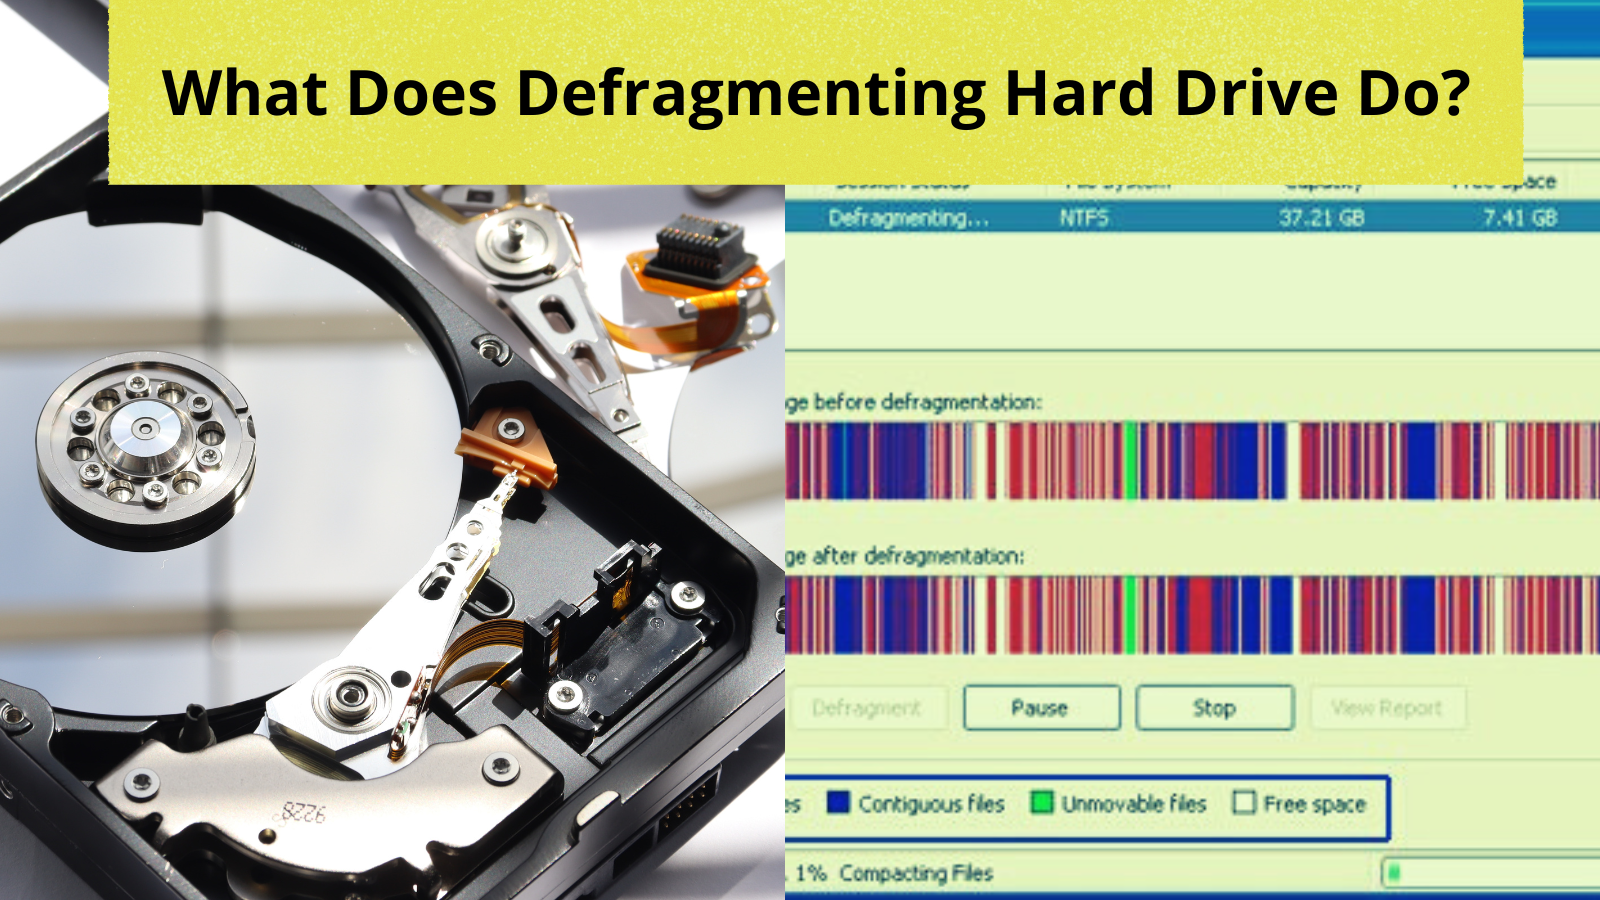 What does defragmenting hard drive do